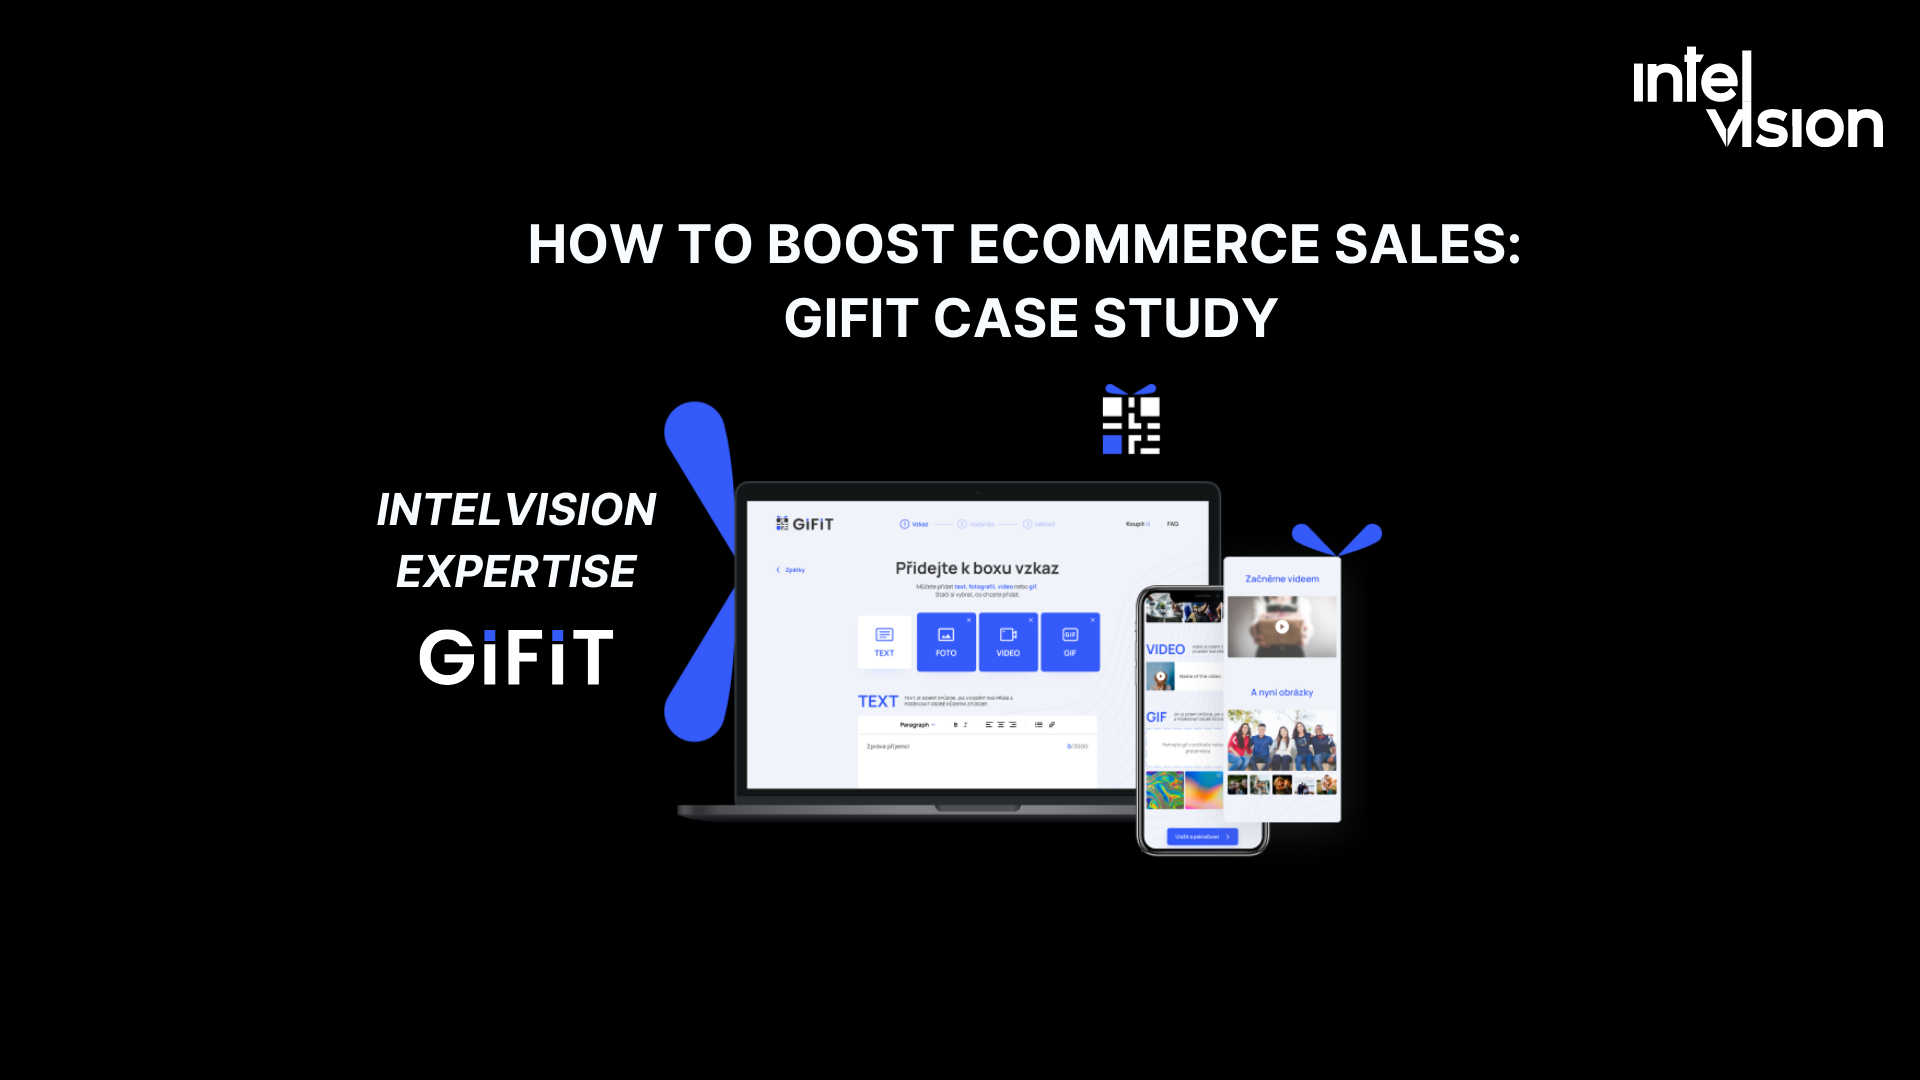 Intelvision knows how to boost ecommerce sales